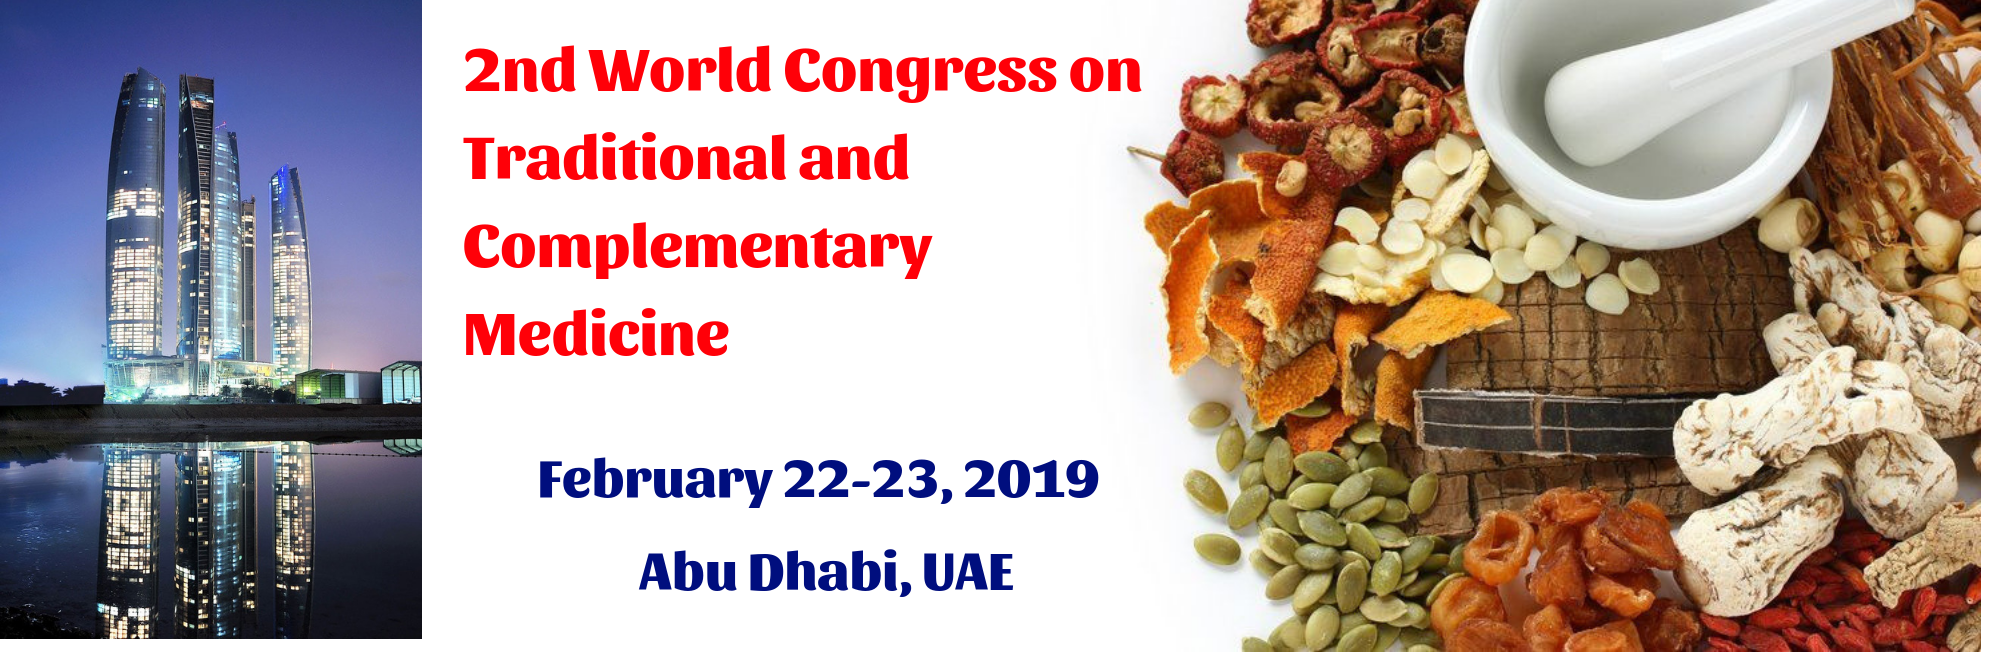 2nd World Congress on Traditional and Complementary Medicine, Abu Dhabi, United Arab Emirates